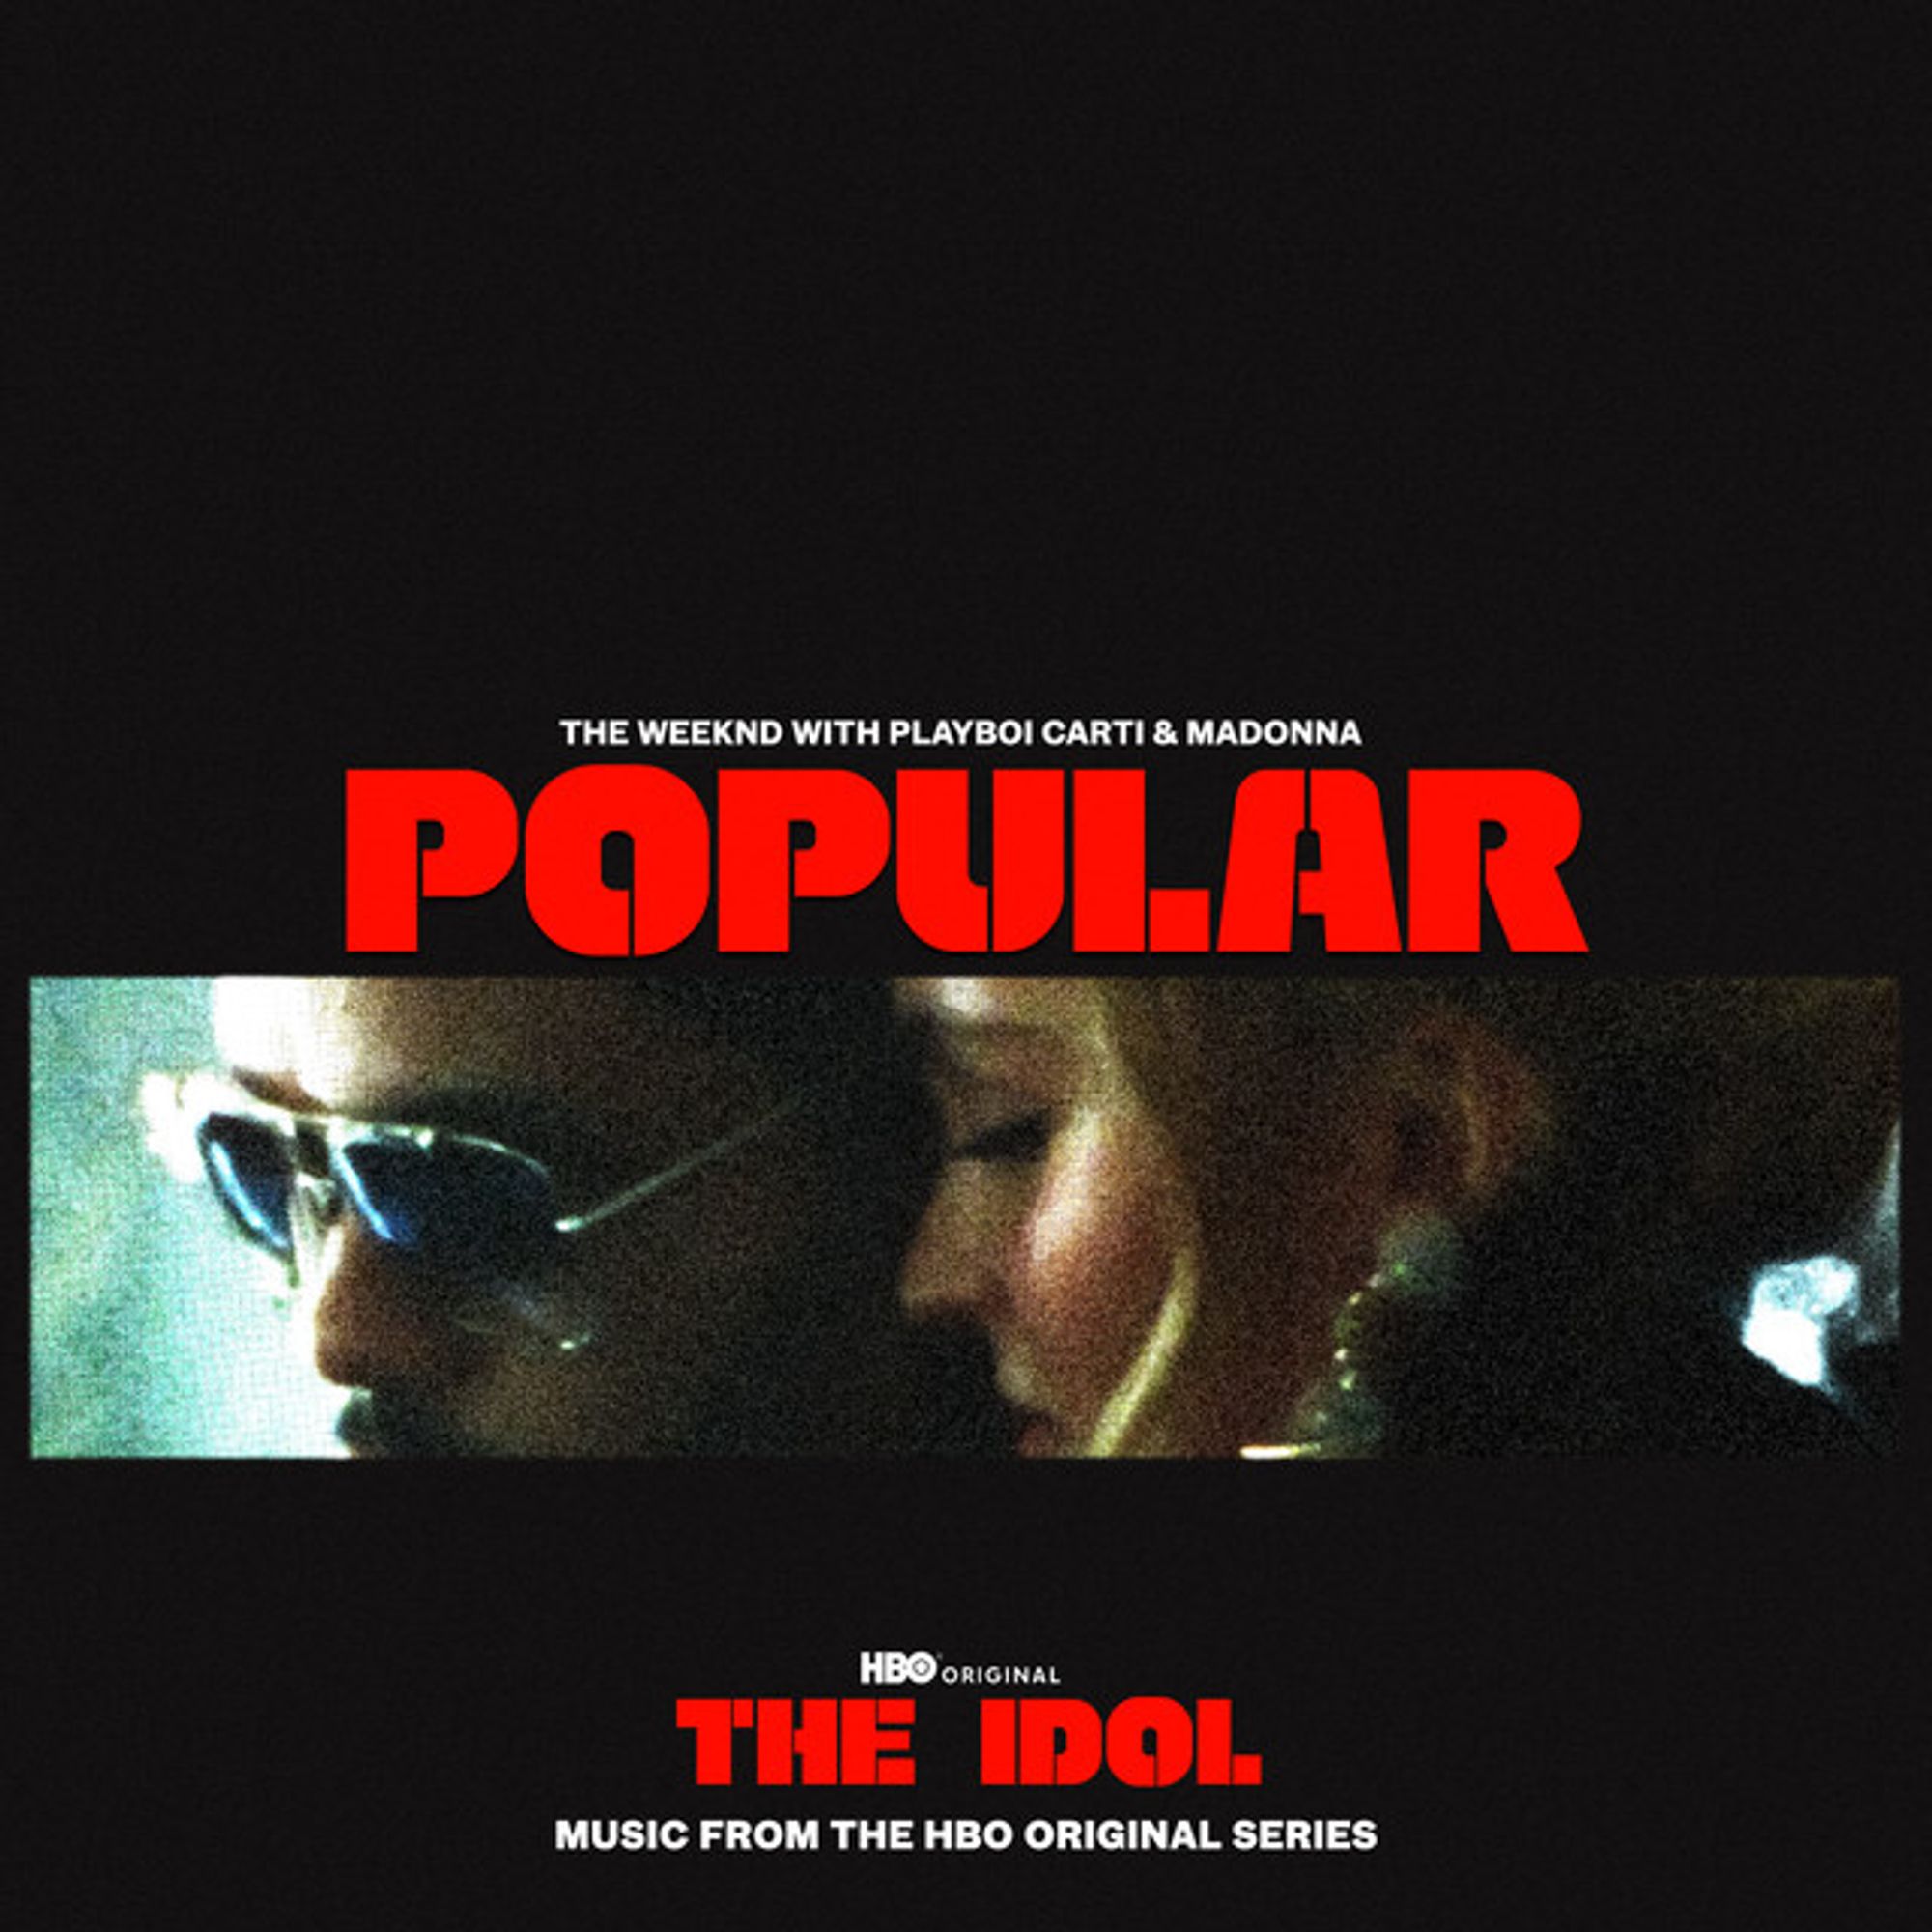 Popular (with Playboi Carti & Madonna) - From The Idol Vol. 1 (Music from the HBO Original Series)